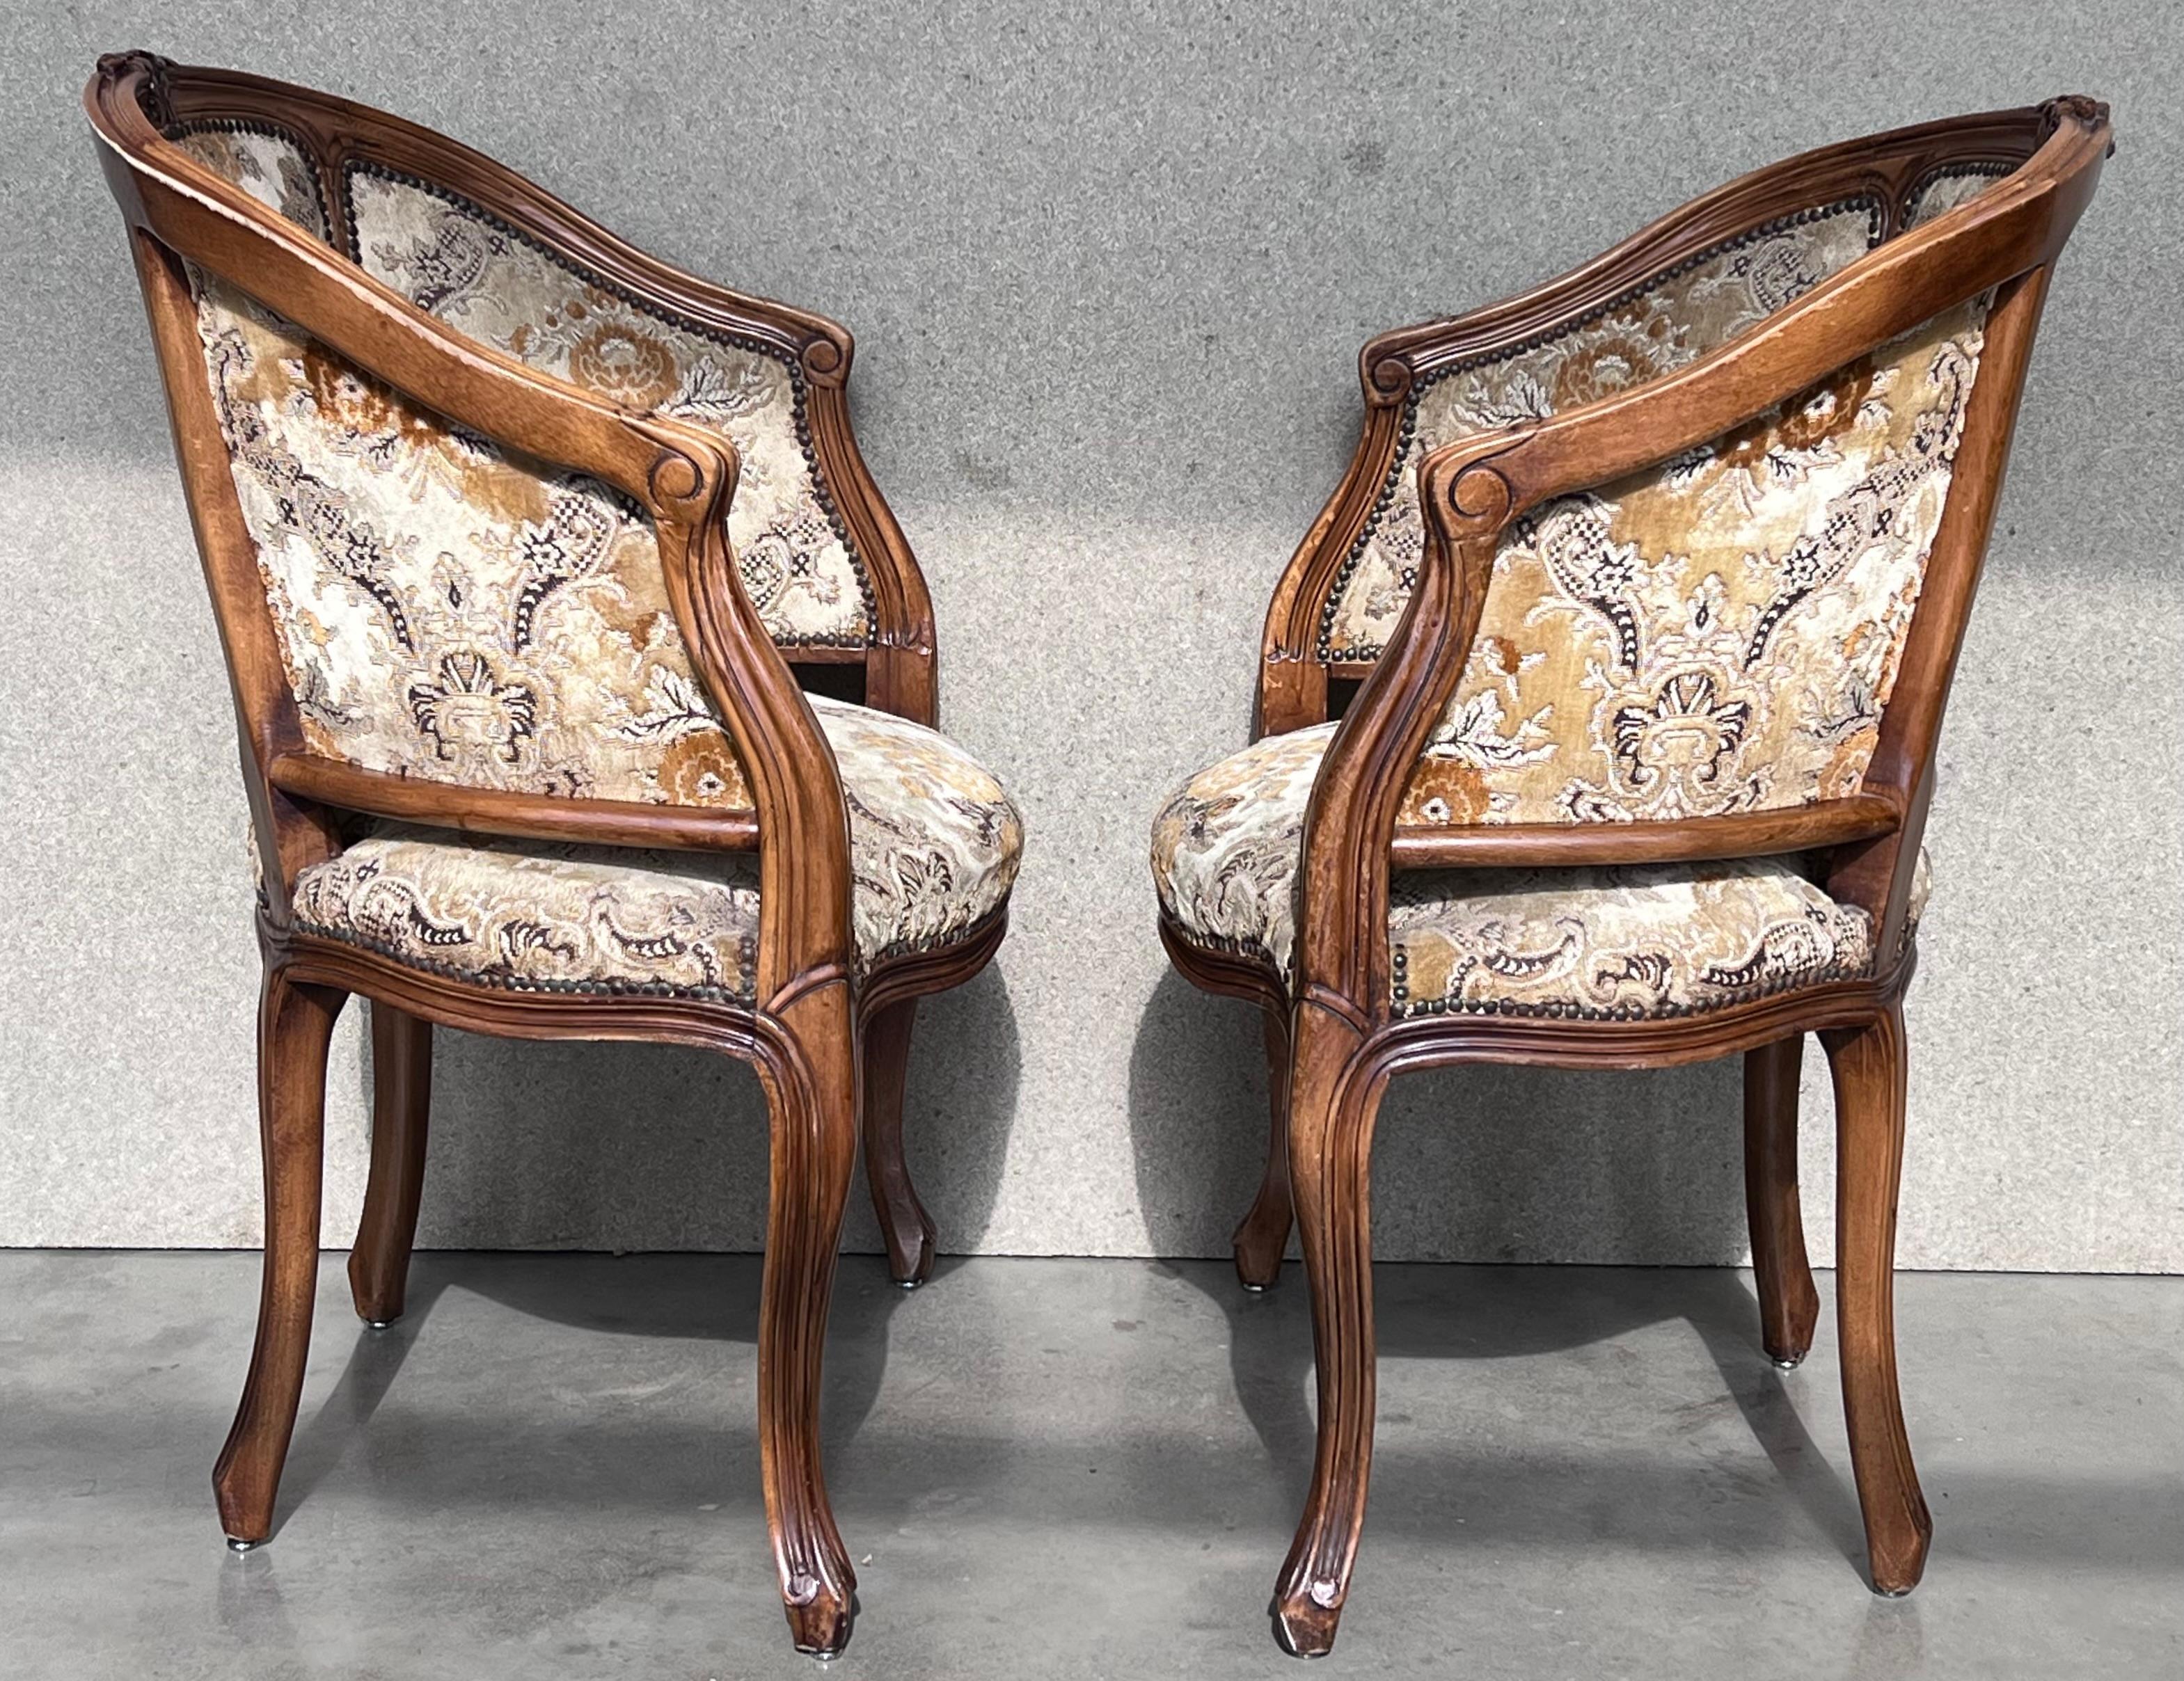 20th Century Pair of French Louis XVI Style Carved Walnut Round Bergere Armchairs